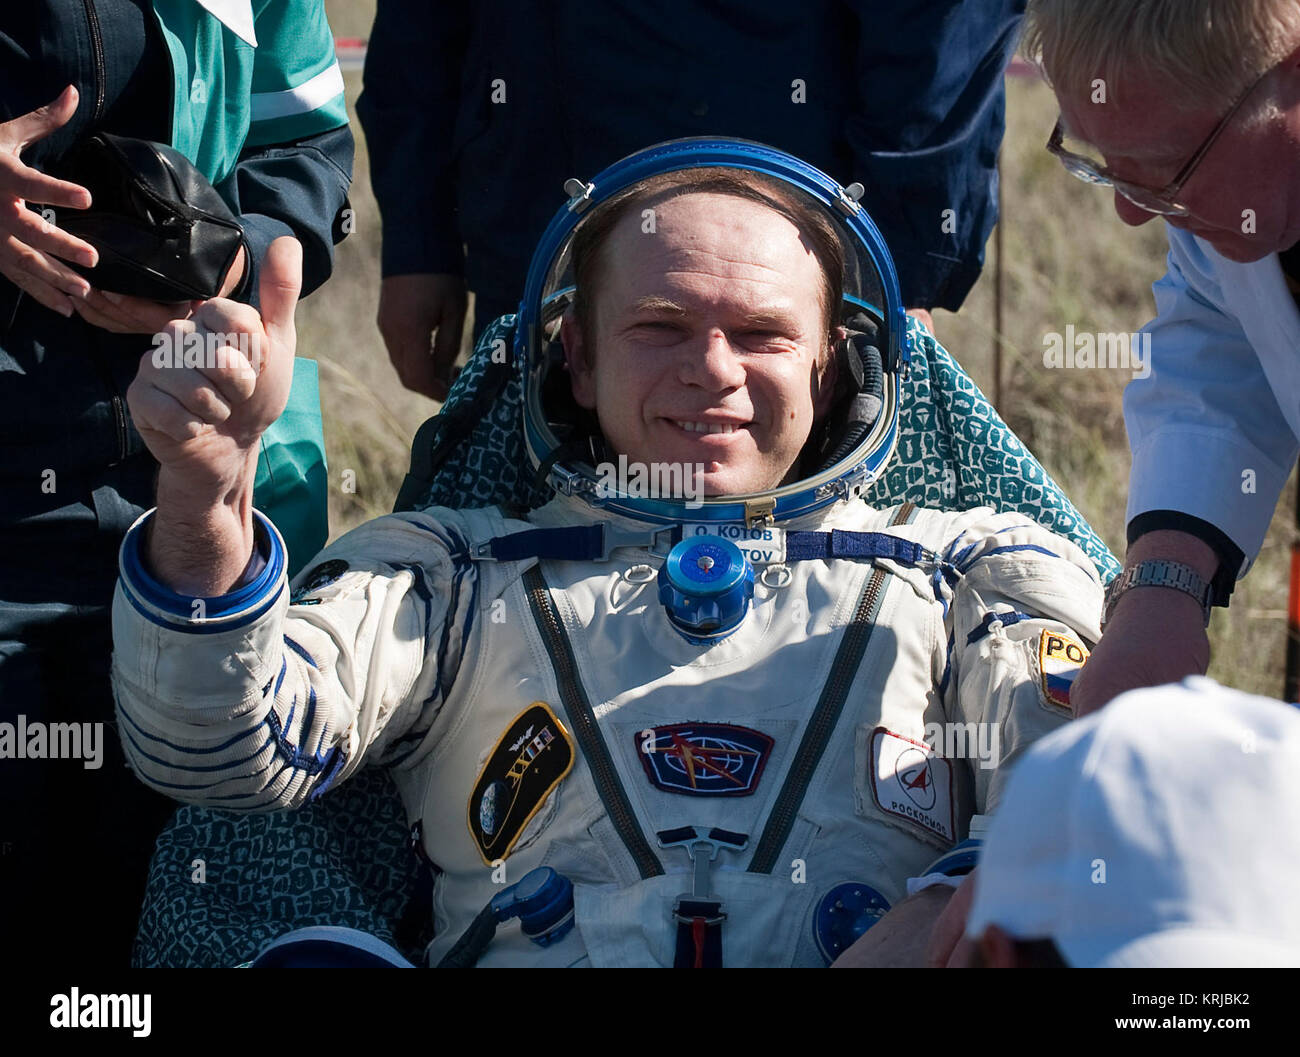 Expedition 23 Commander Oleg Kotov is seen sitting in a chair outside the Soyuz Capsule just minutes after he and fellow crew members T.J. Creamer and Soichi Noguchi landed in their Soyuz TMA-17 capsule near the town of Zhezkazgan, Kazakhstan on Wednesday, June 2, 2010. NASA Astronaut Creamer, Russian Cosmonaut Kotov and Japanese Astronaut Noguchi are returning from six months onboard the International Space Station where they served as members of the Expedition 22 and 23 crews. Photo Credit: (NASA/Bill Ingalls) SoyuzTMA17 landing Oleg Kotov Stock Photo